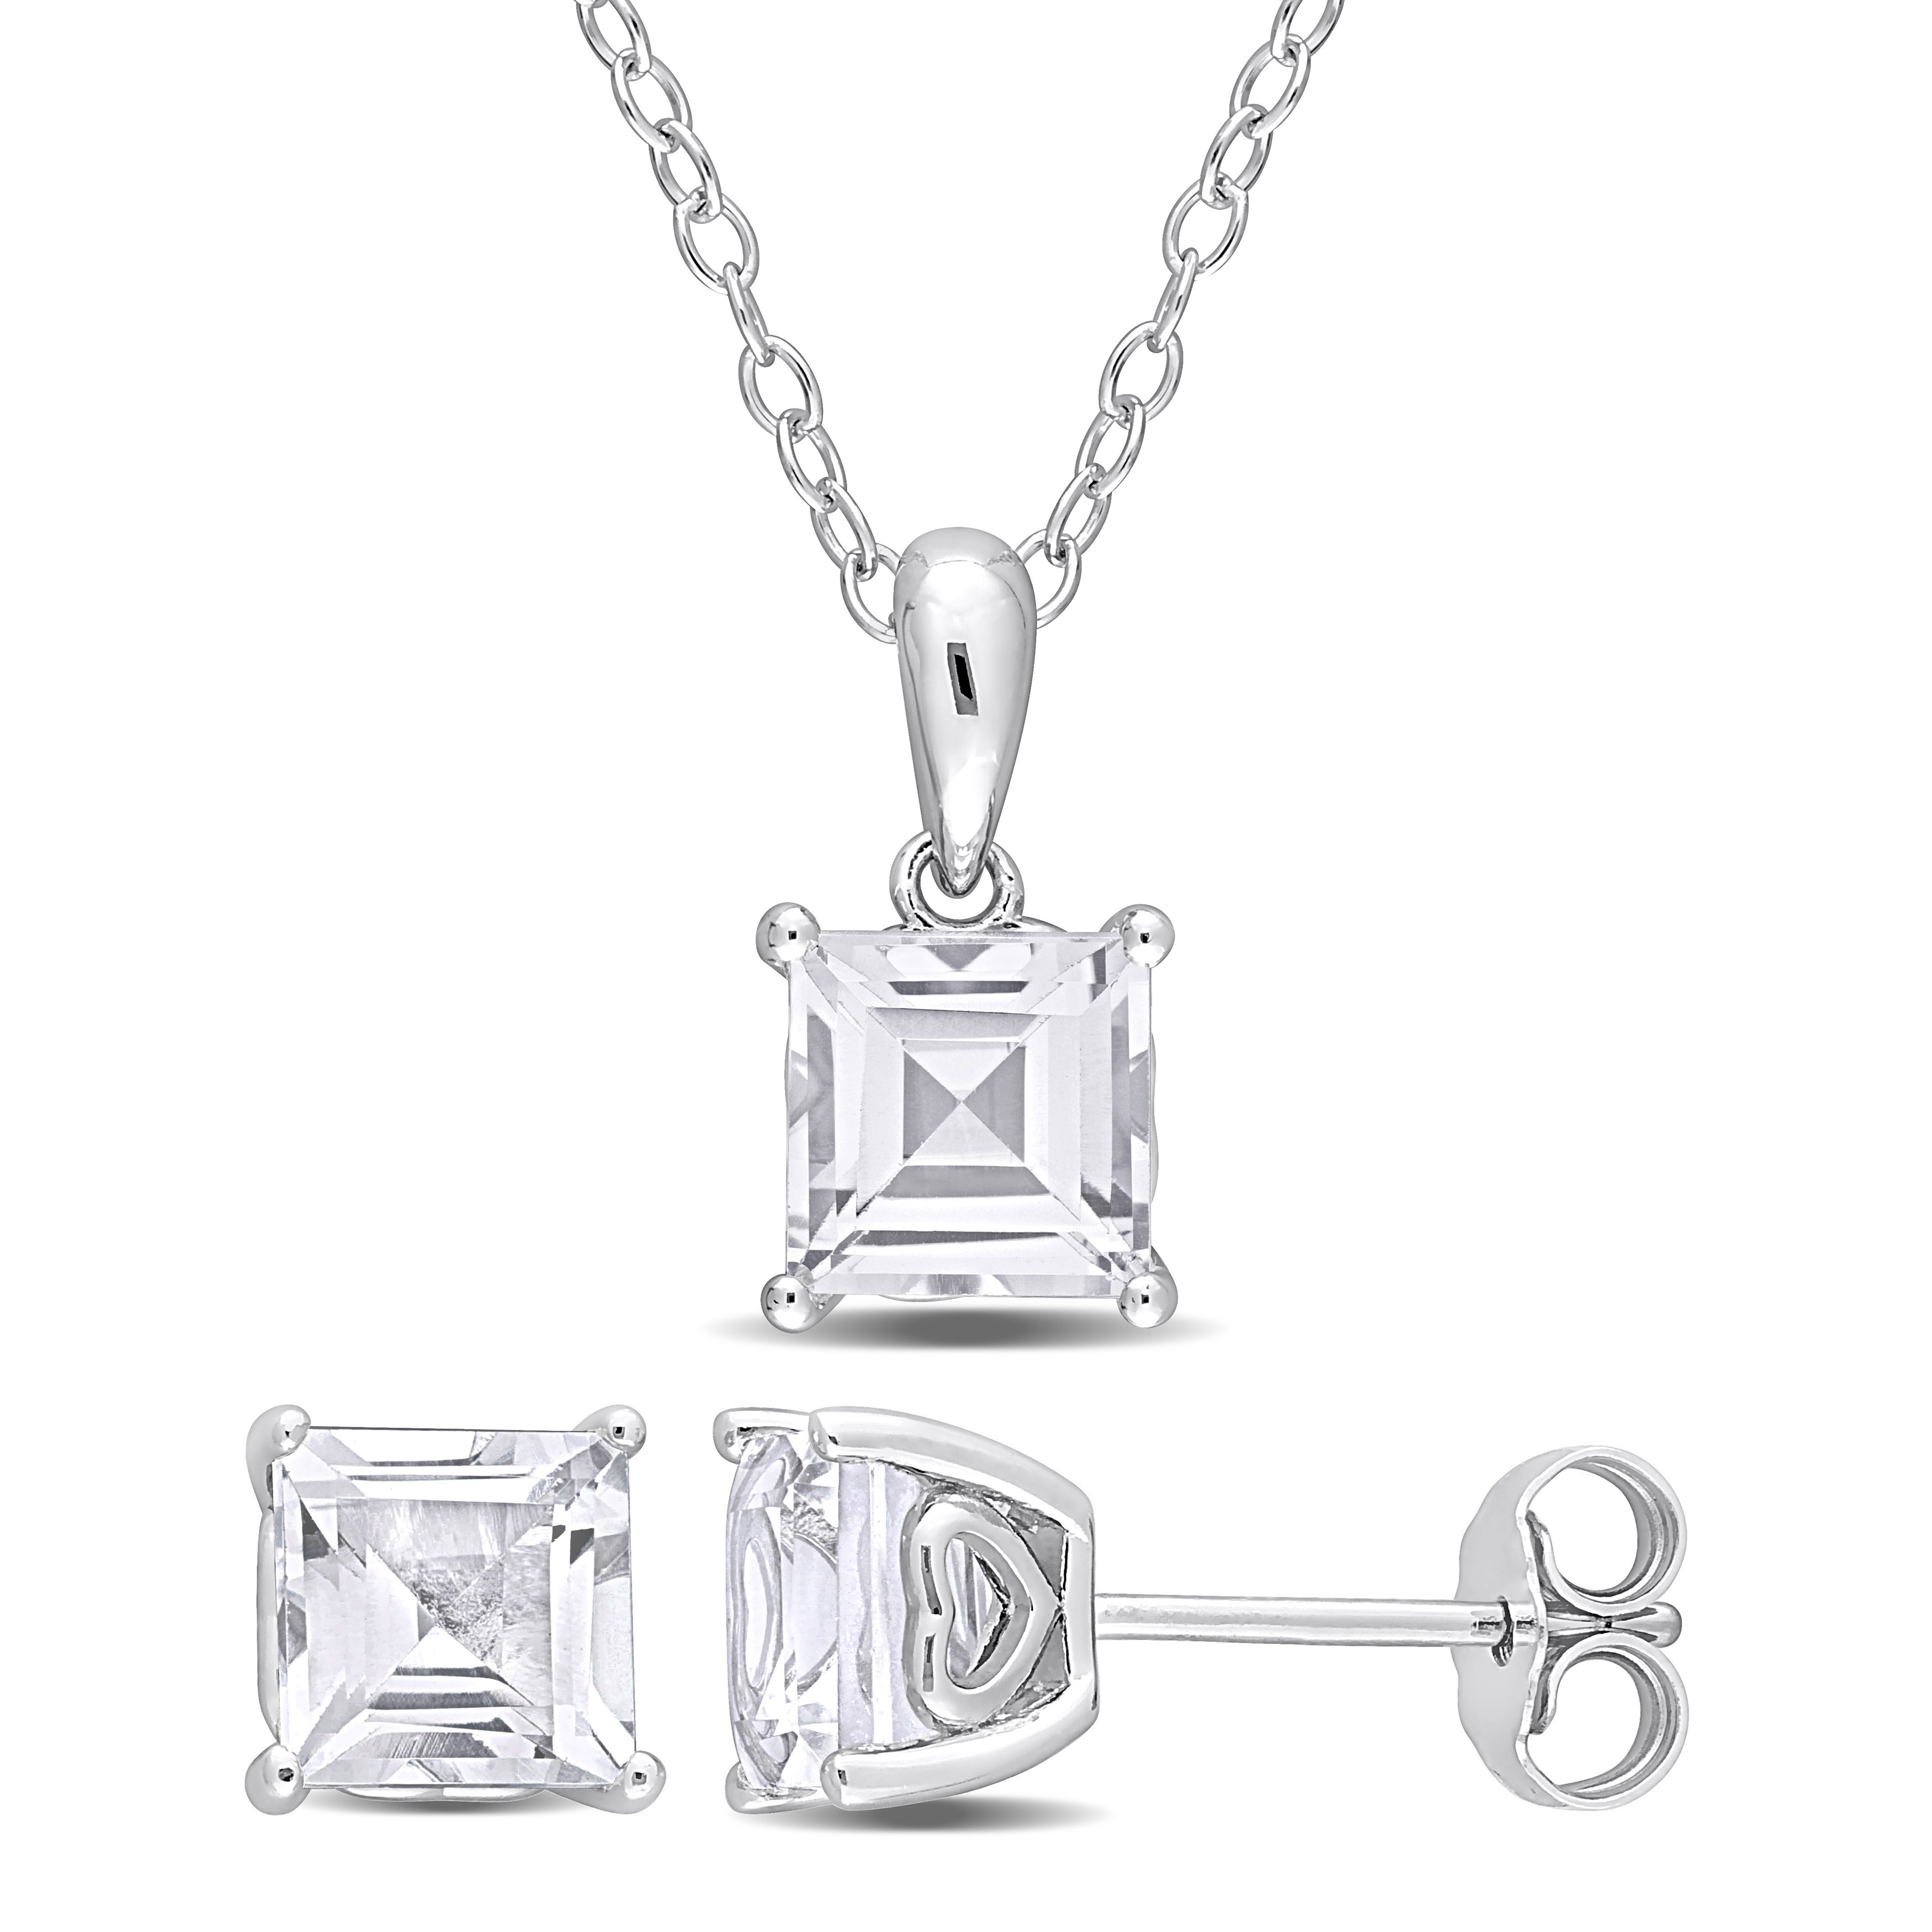 4 CT TGW Square White Topaz 2-Piece Set of Pendant with Chain and Earrings in Sterling Silver